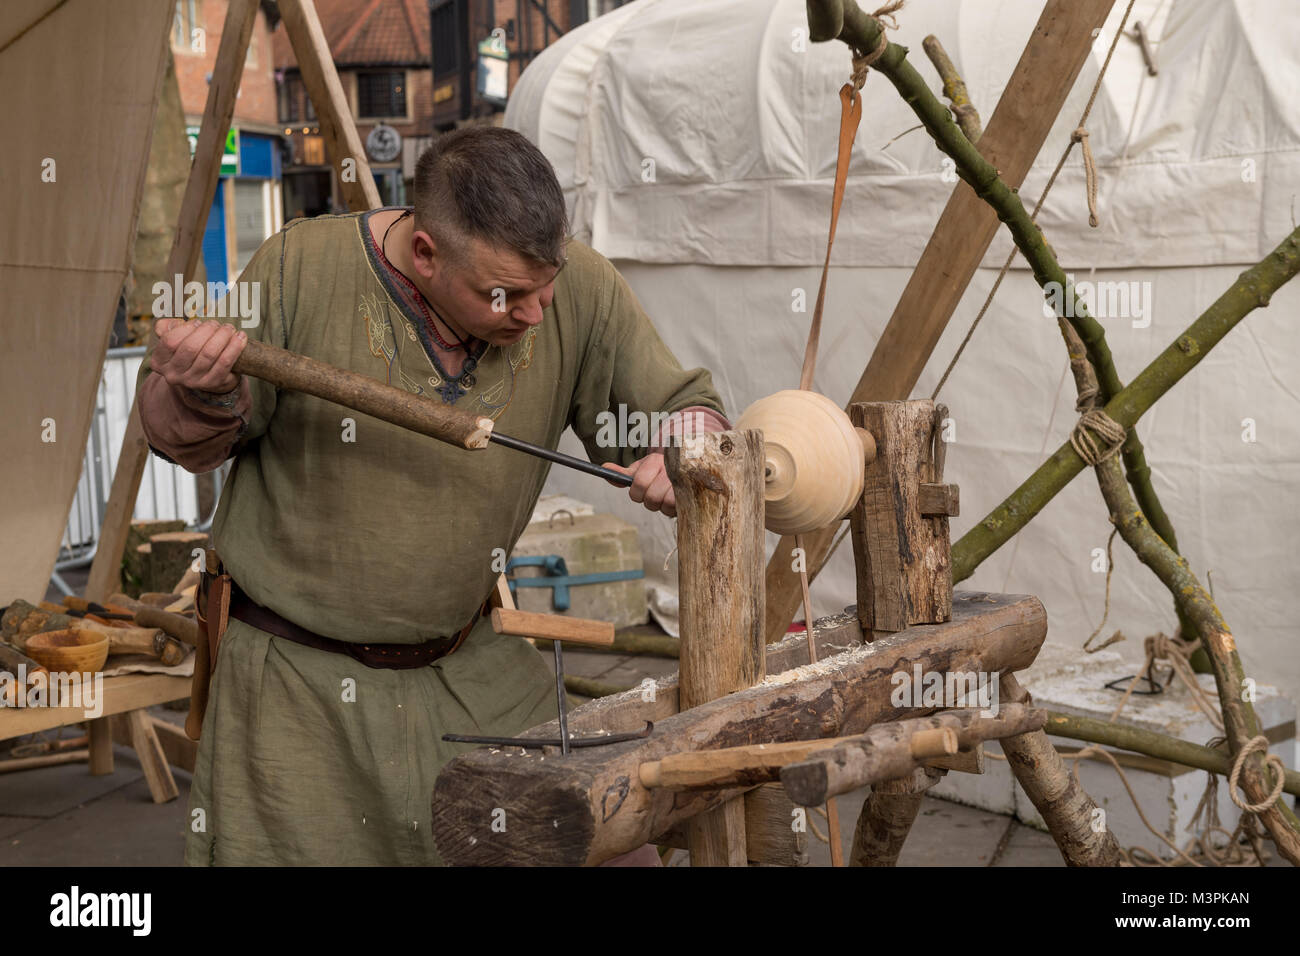 York, UK, 12th February 2018. Person dressed as a Viking at the annual Jorvik Viking Festival held in the city centre of York. This man is a skilled wood-turner & is concentrating on crafting a wooden bowl, using a simple lathe & handmade tools. He is taking part in the realistic re-enactment of life at a Viking market. North Yorkshire, England, UK. Credit: Ian Lamond/Alamy Live News Stock Photo